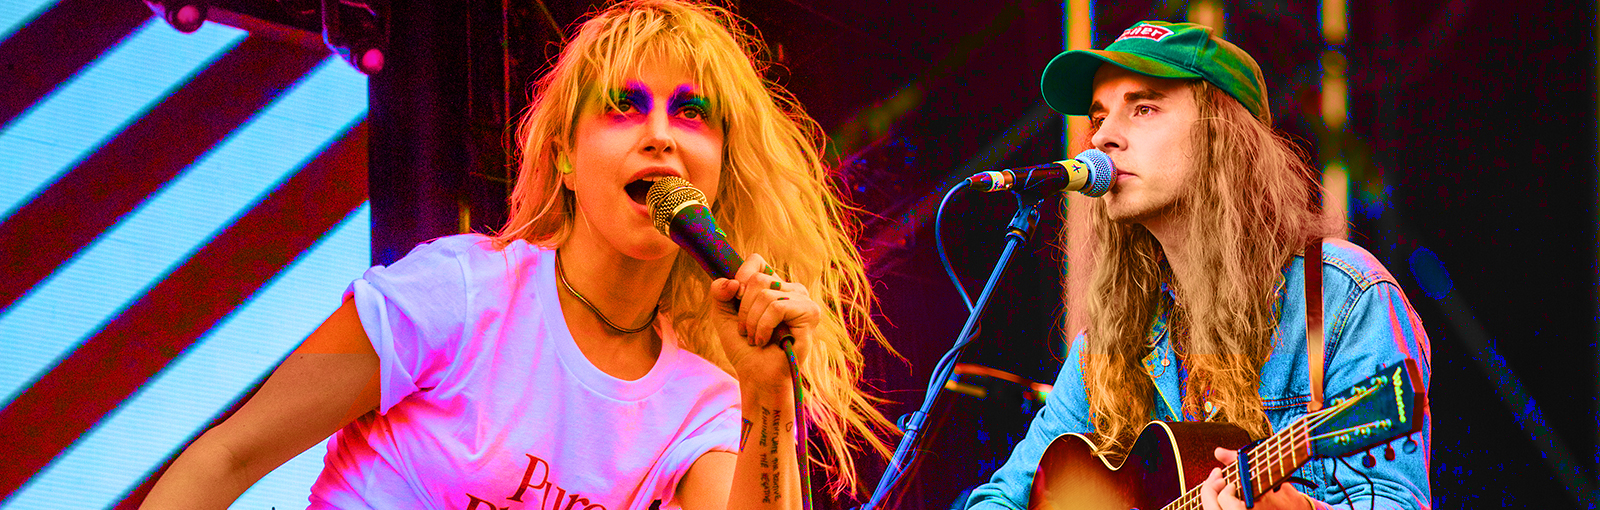 indie-tfeat-hayley williams andy shauf.jpg